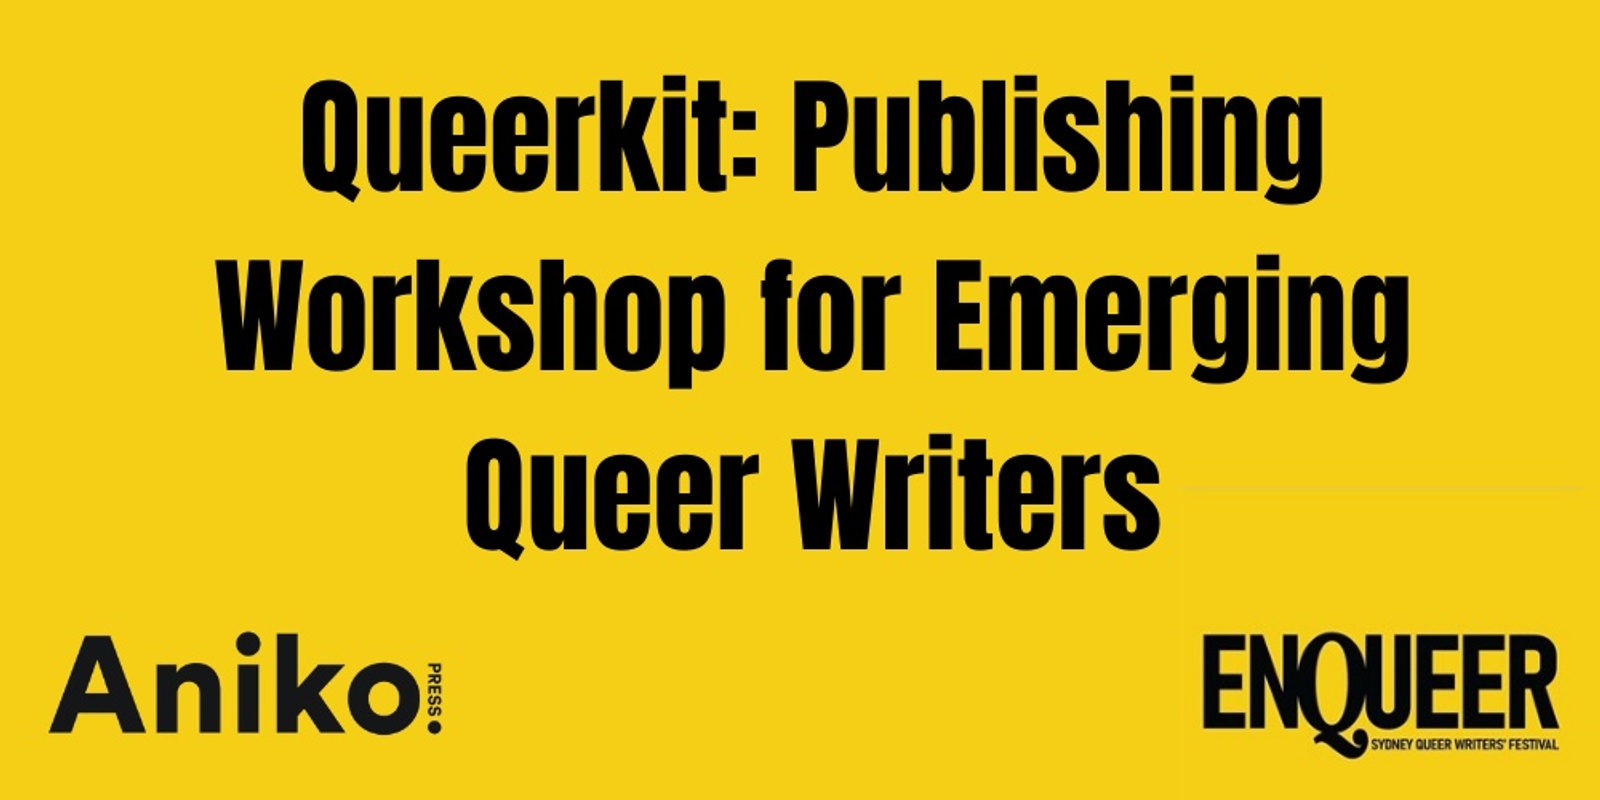 Banner image for Queerkit: Publishing Workshop for Emerging Writers